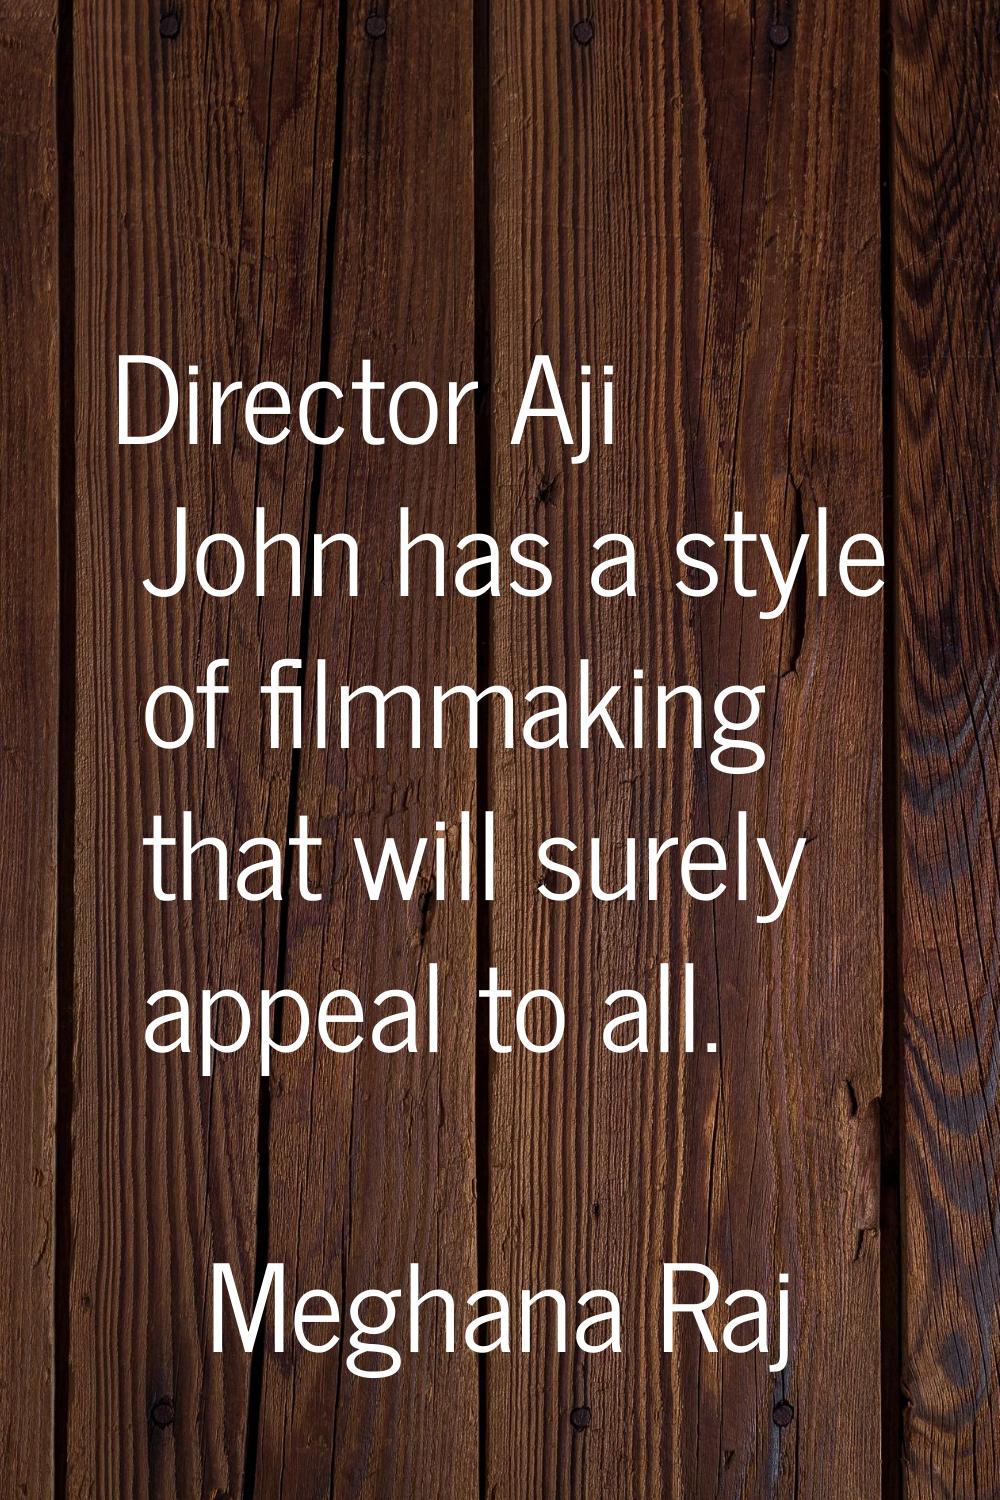 Director Aji John has a style of filmmaking that will surely appeal to all.